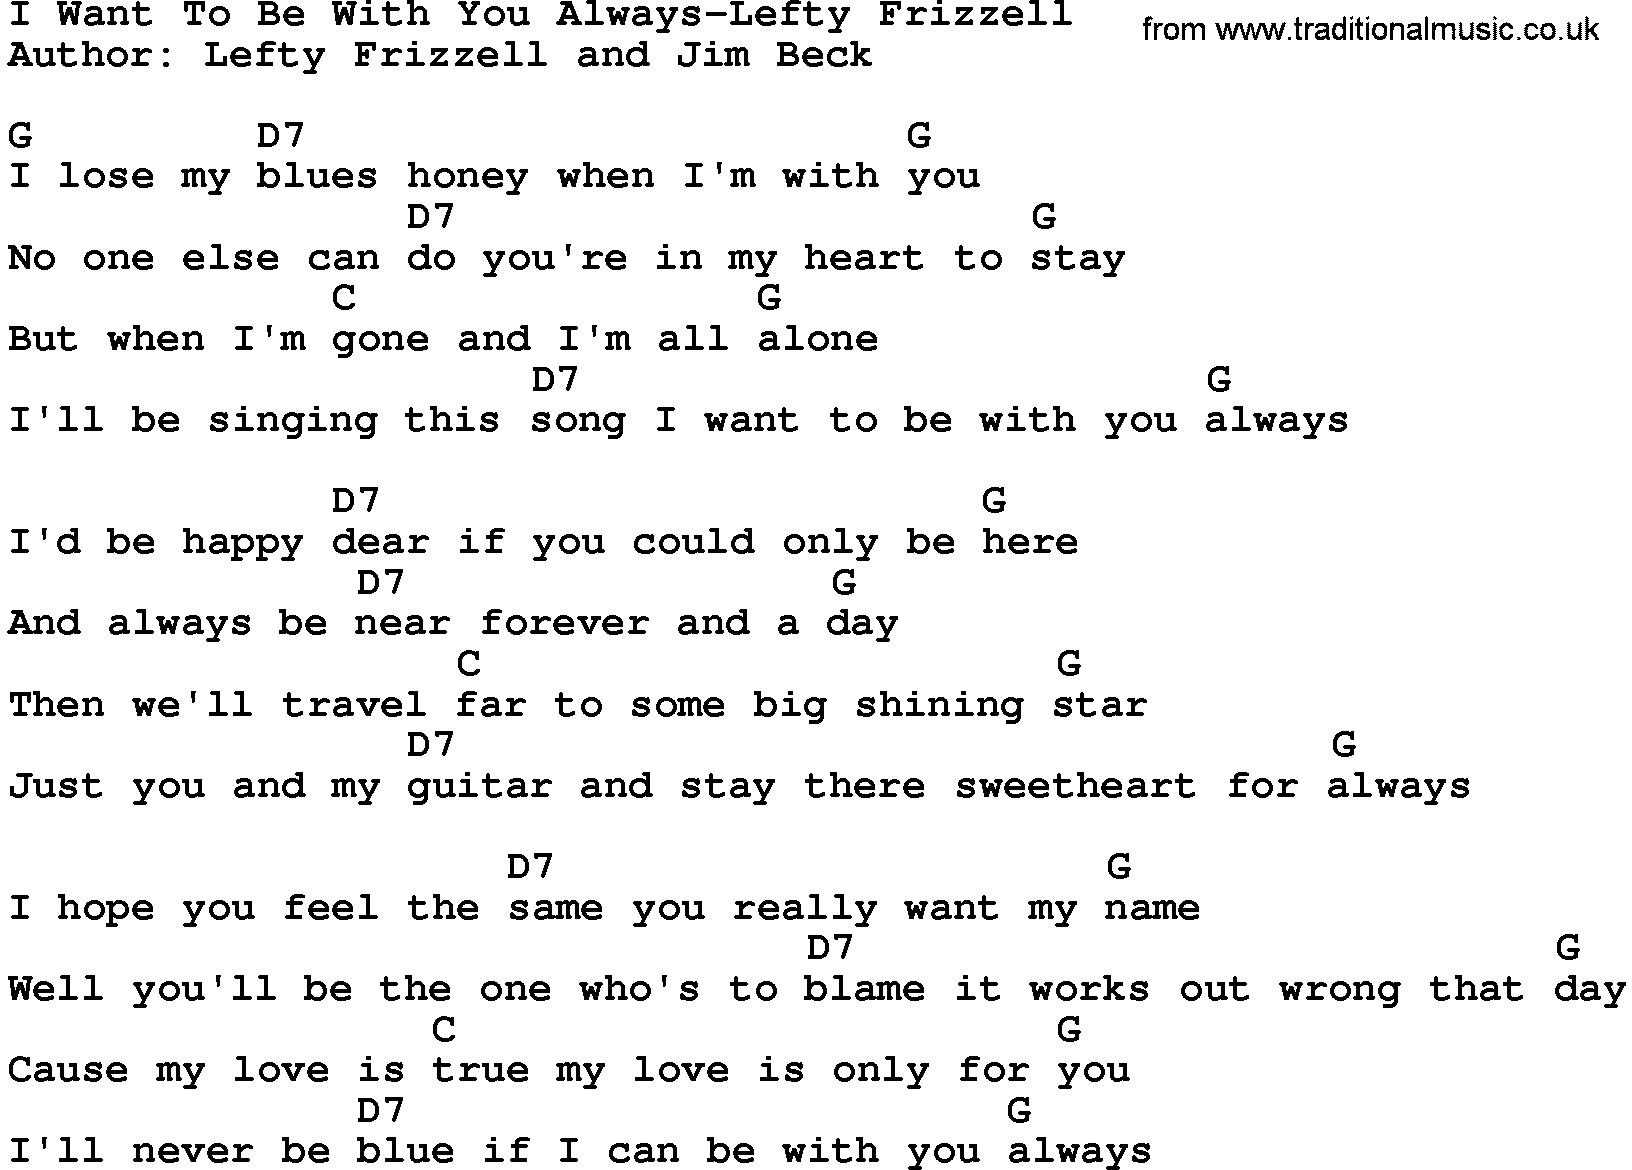 Country music song: I Want To Be With You Always-Lefty Frizzell lyrics and chords